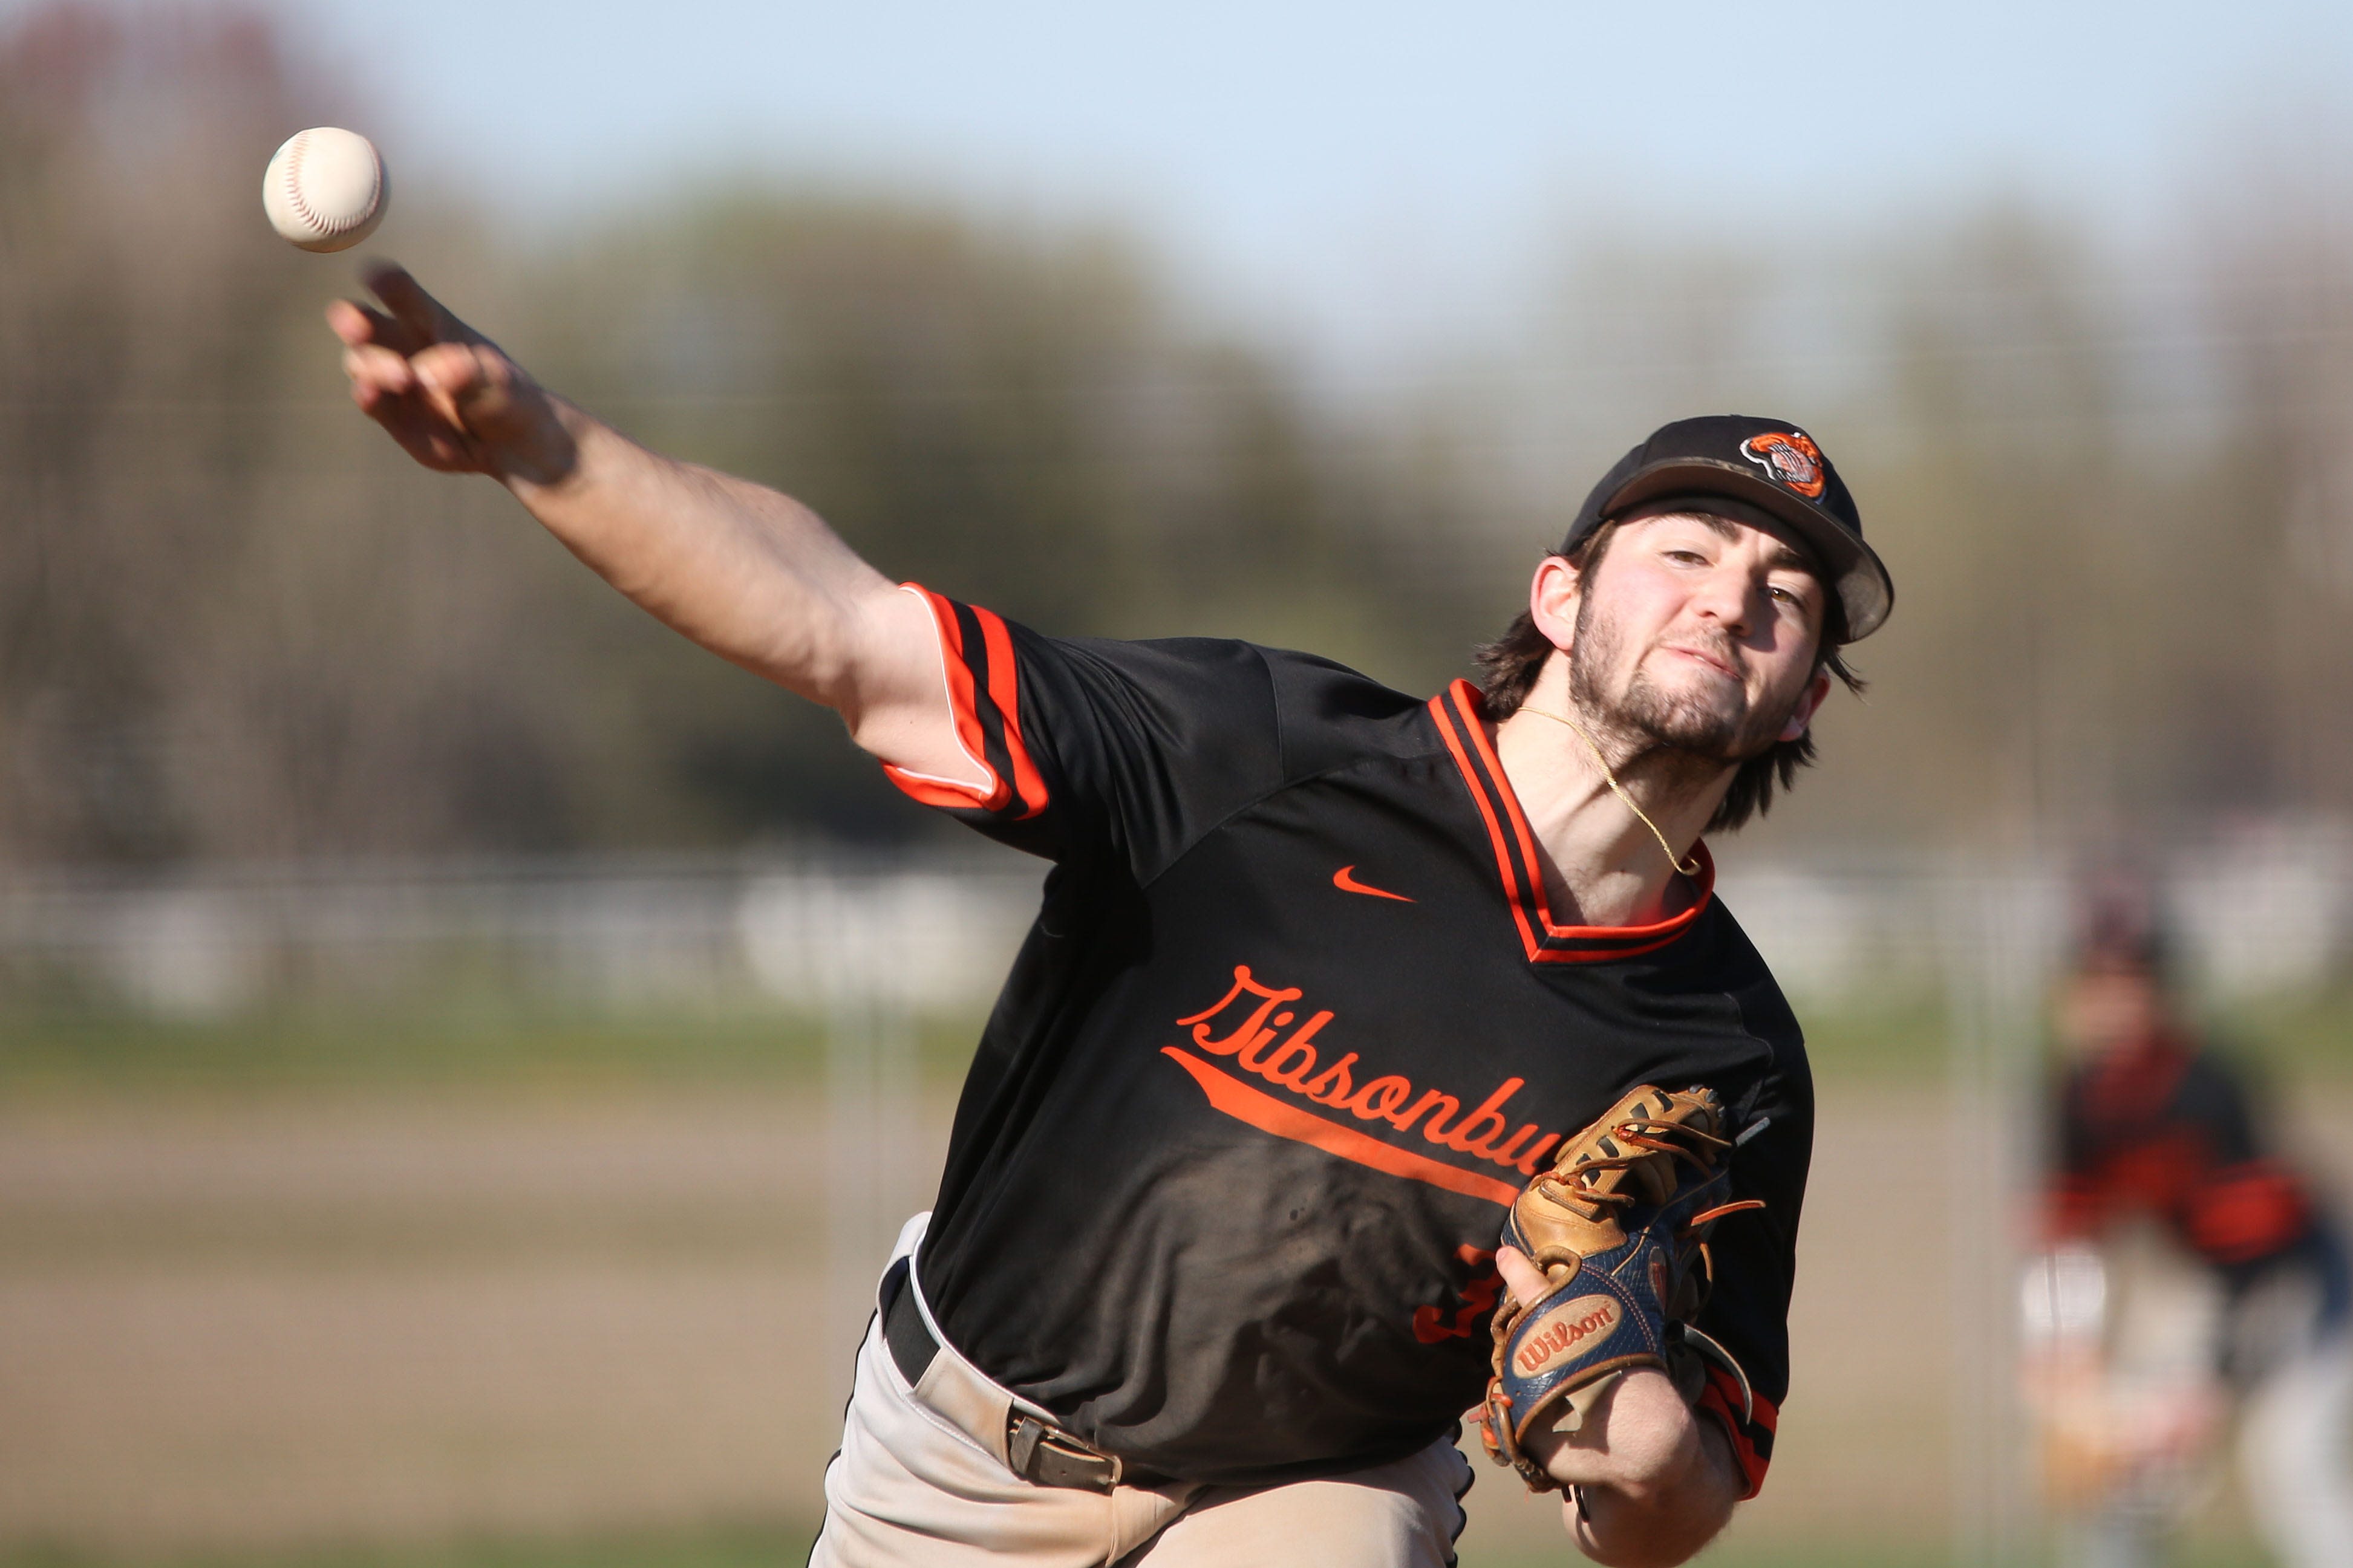 Hoover puts everything together on mound for Gibsonburg